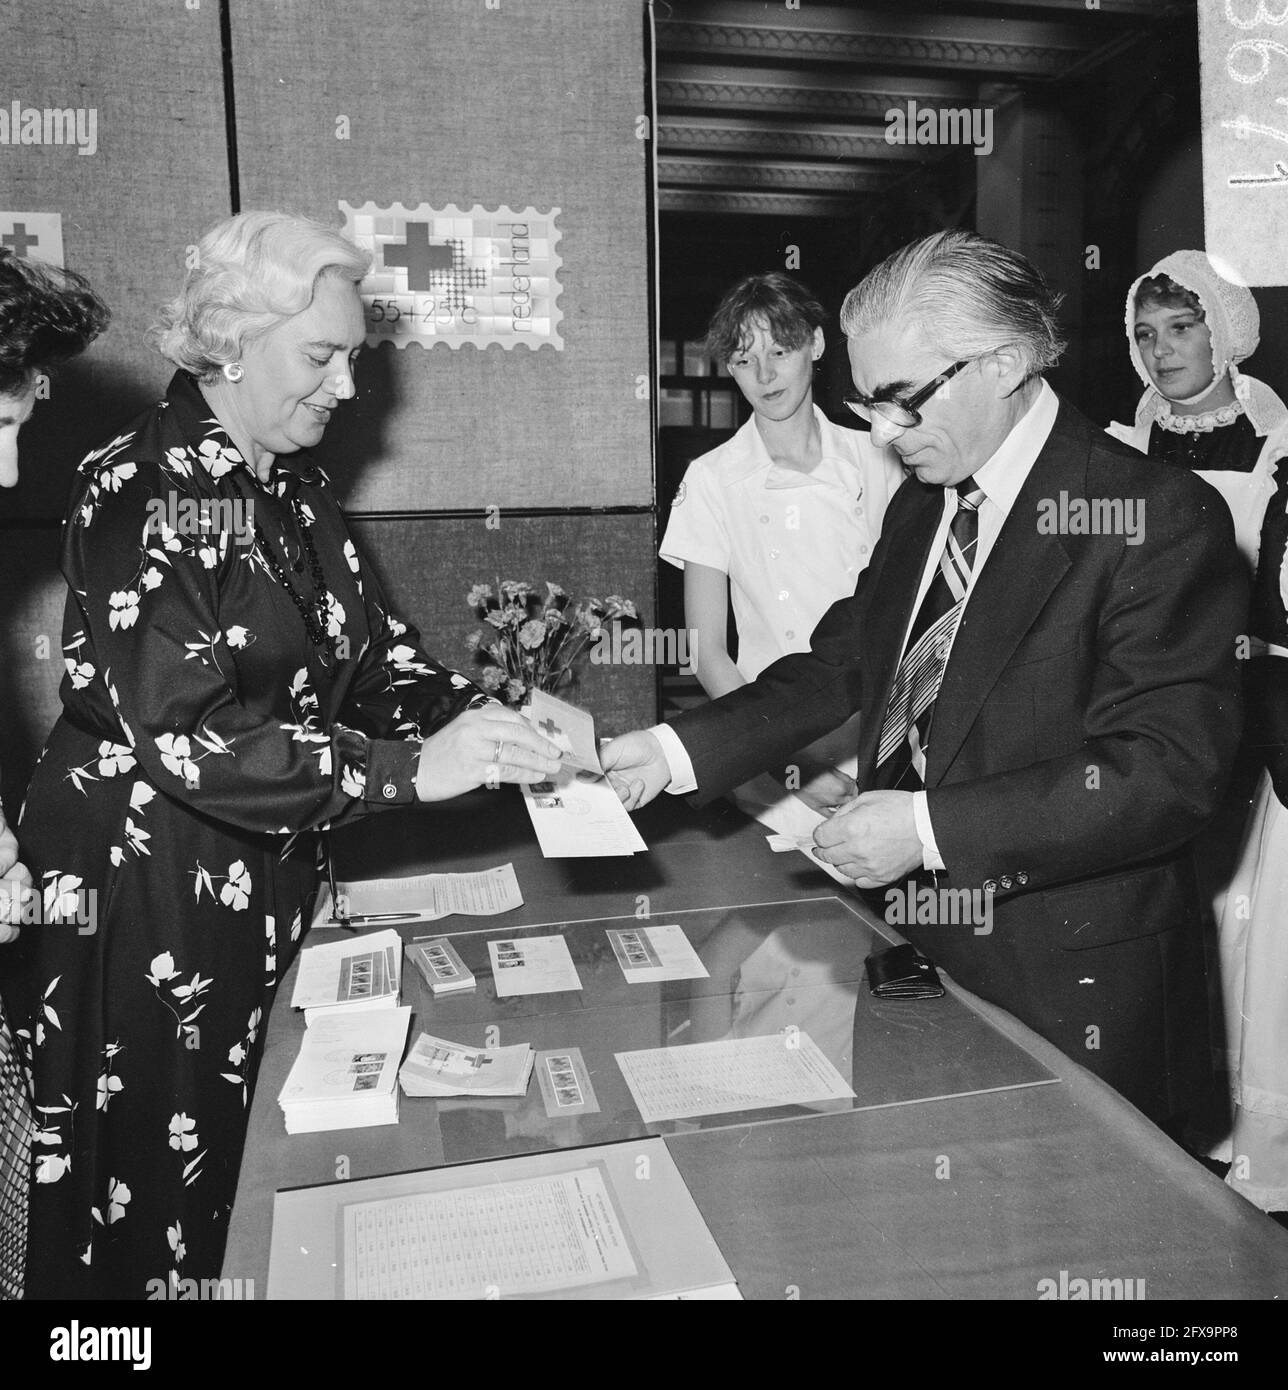 Mayor Polak buys 1st set of Red Cross stamps from Mrs. Polak, August 22, 1978, POSTAGE STAMPS, mayors, The Netherlands, 20th century press agency photo, news to remember, documentary, historic photography 1945-1990, visual stories, human history of the Twentieth Century, capturing moments in time Stock Photo